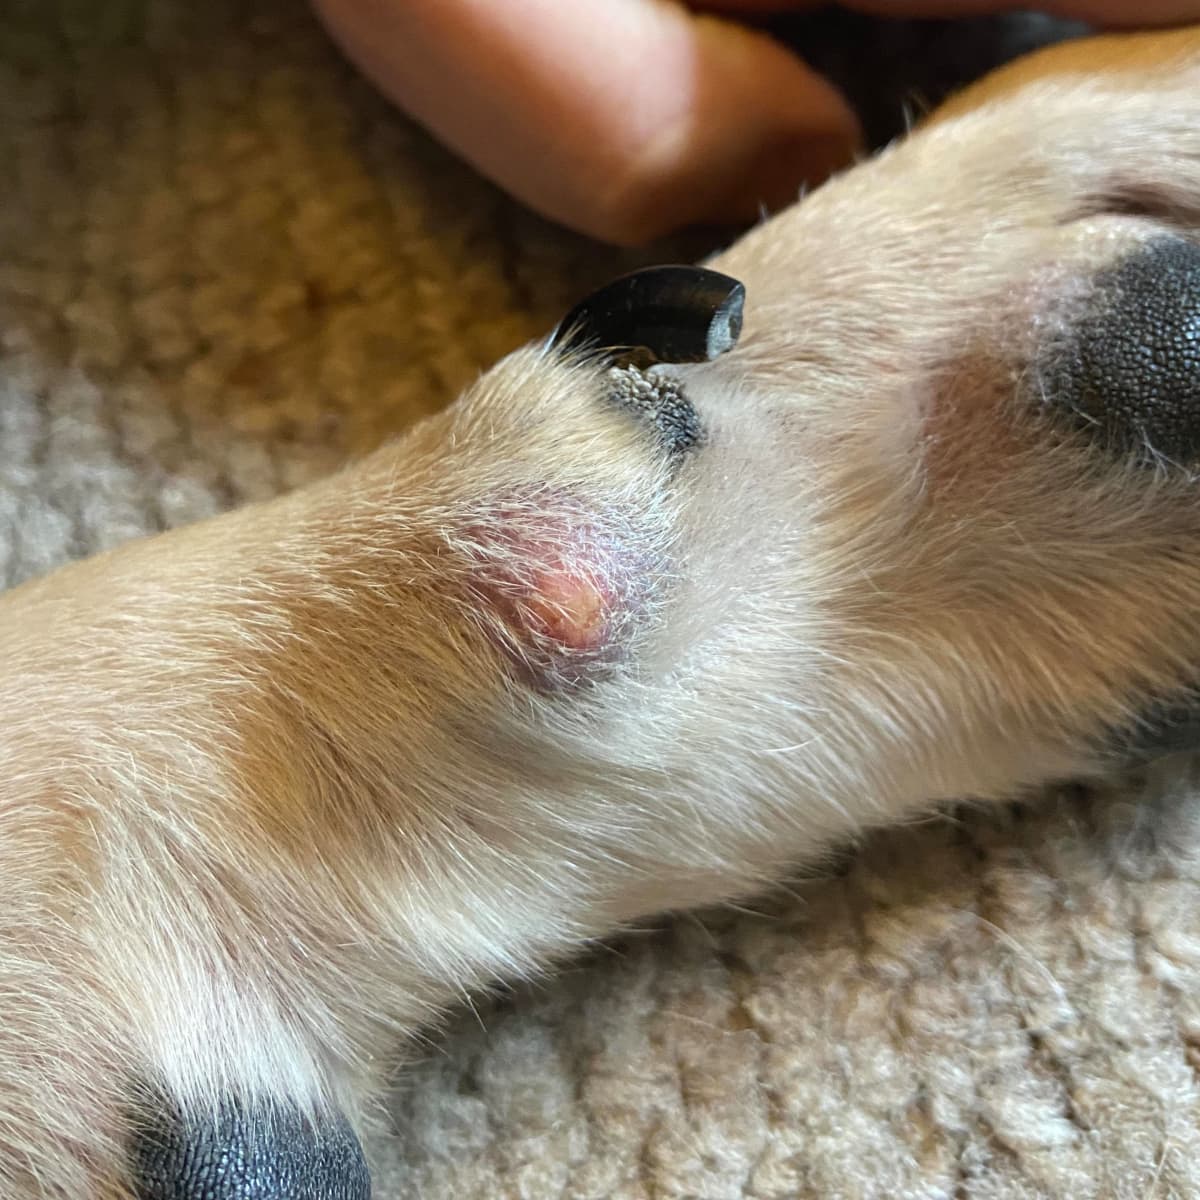 What'S This Lump On My Dog'S Paw? - Pethelpful